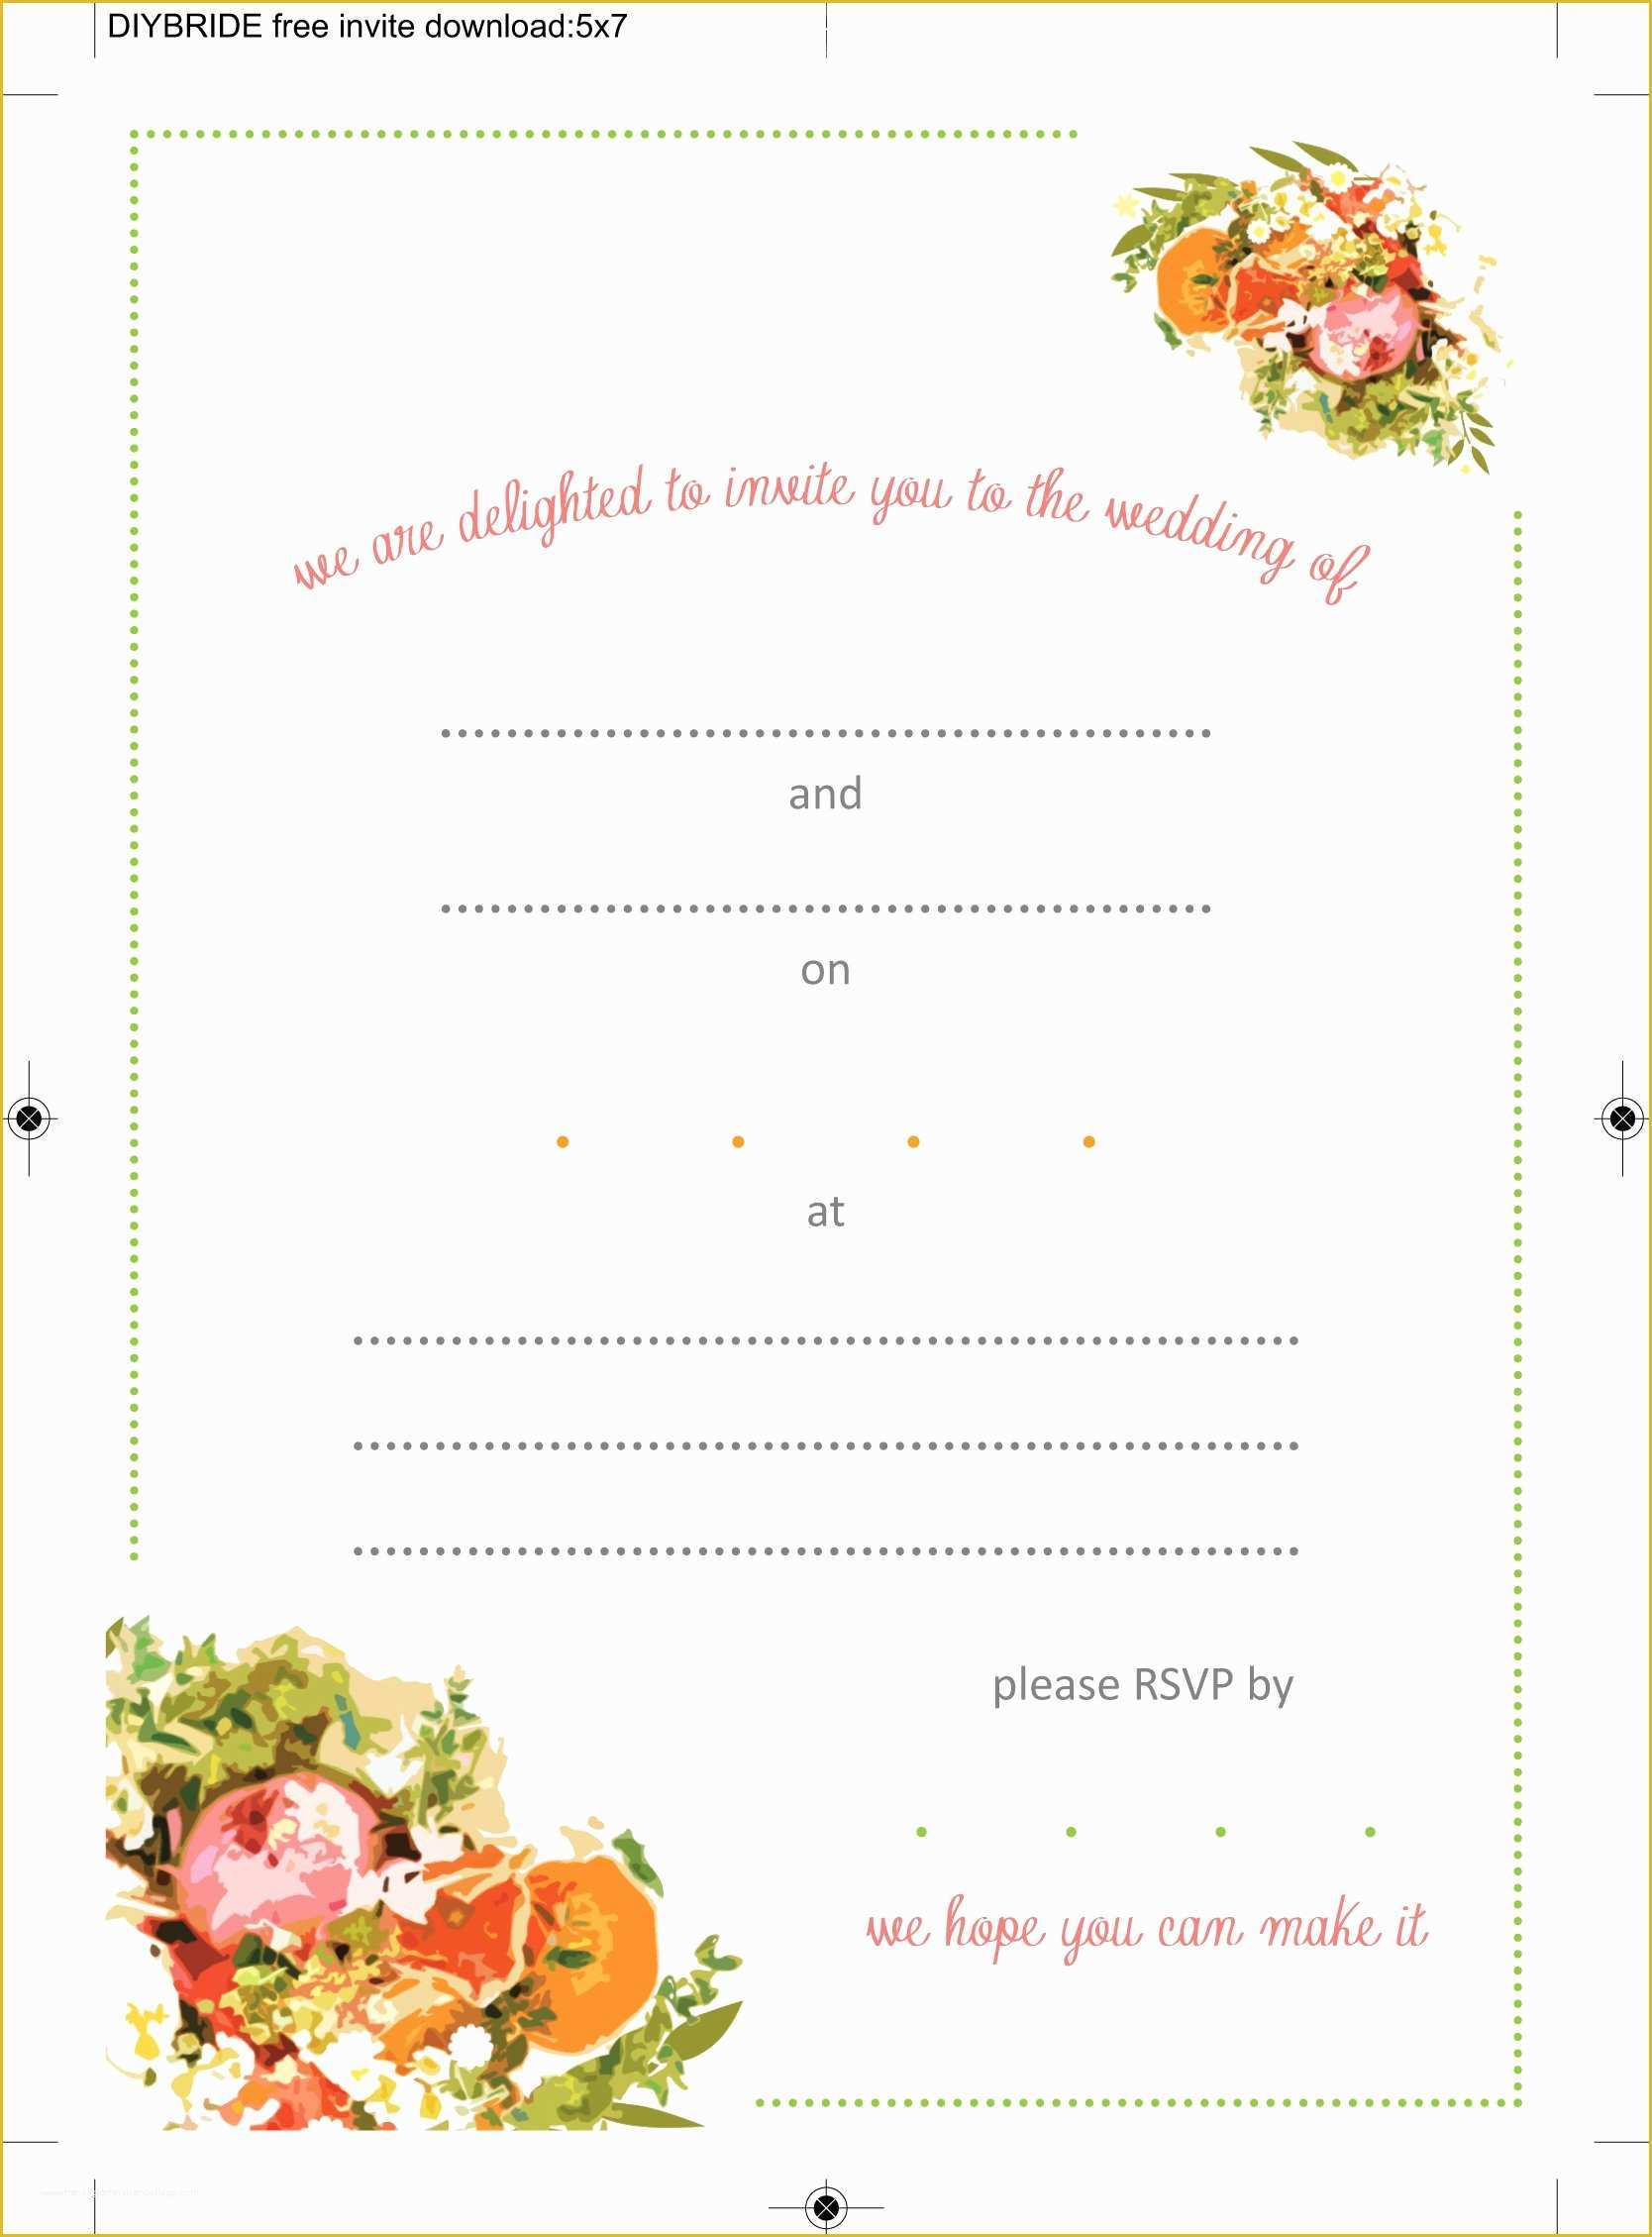 Email Invitation Templates Free Download Of Wedding Invitation Templates that are Cute and Easy to